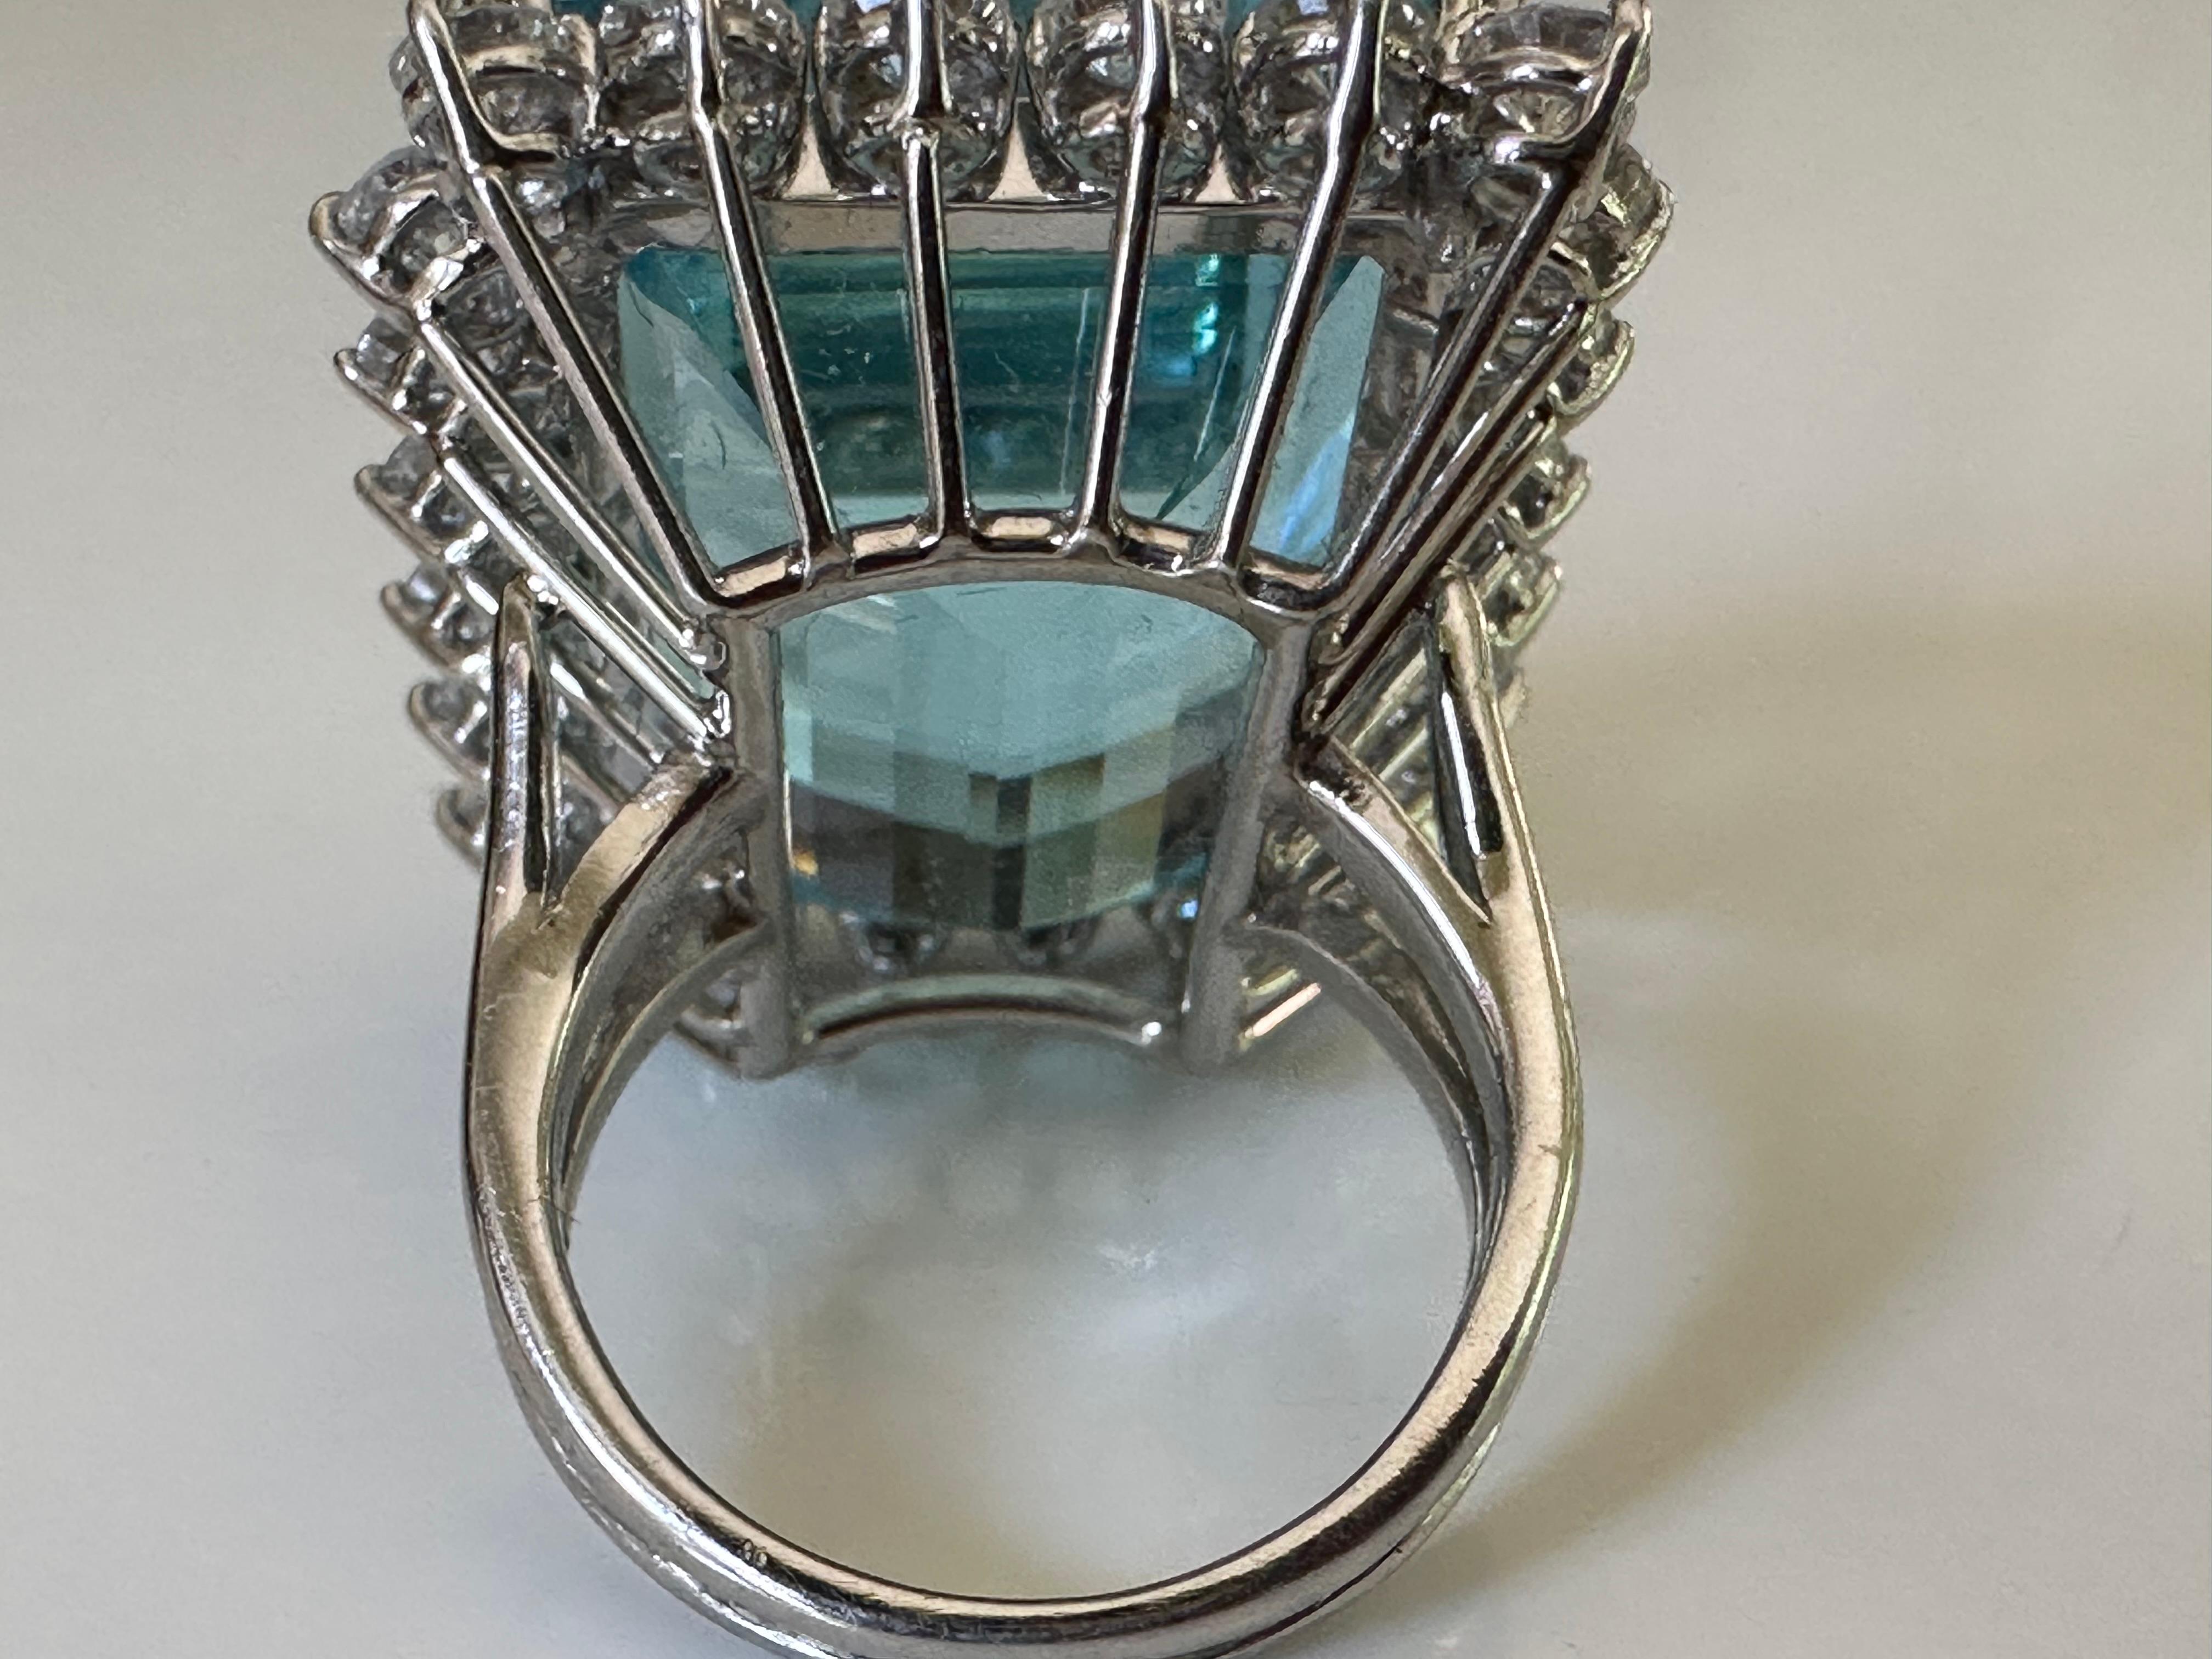 49.20-Carat Emerald-Cut Aquamarine and Diamond Cocktail Ring  In Good Condition For Sale In Denver, CO